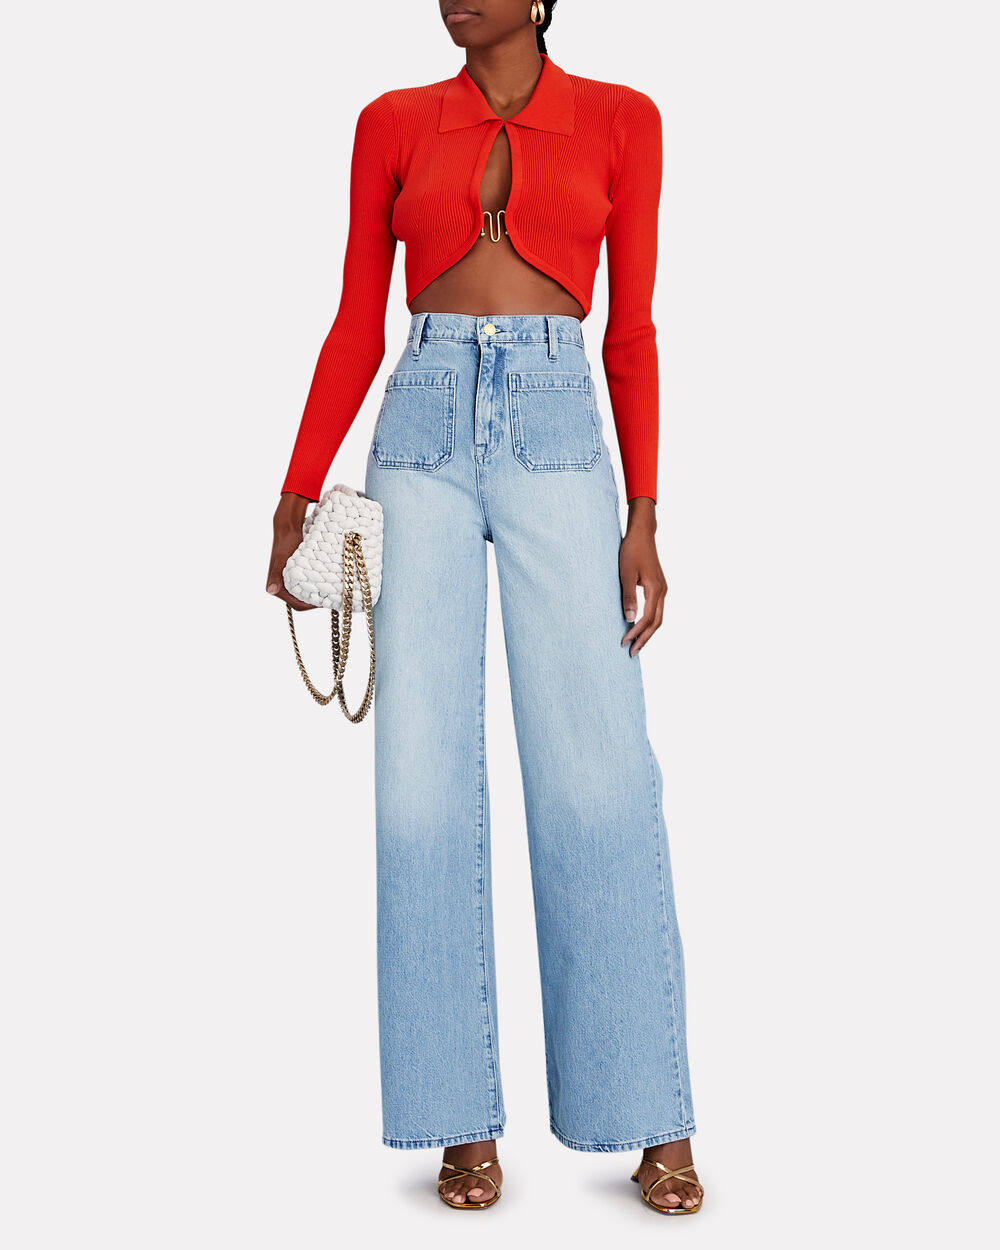 Triarchy Ms. Onassis Long Island Jeans In Blue | INTERMIX®